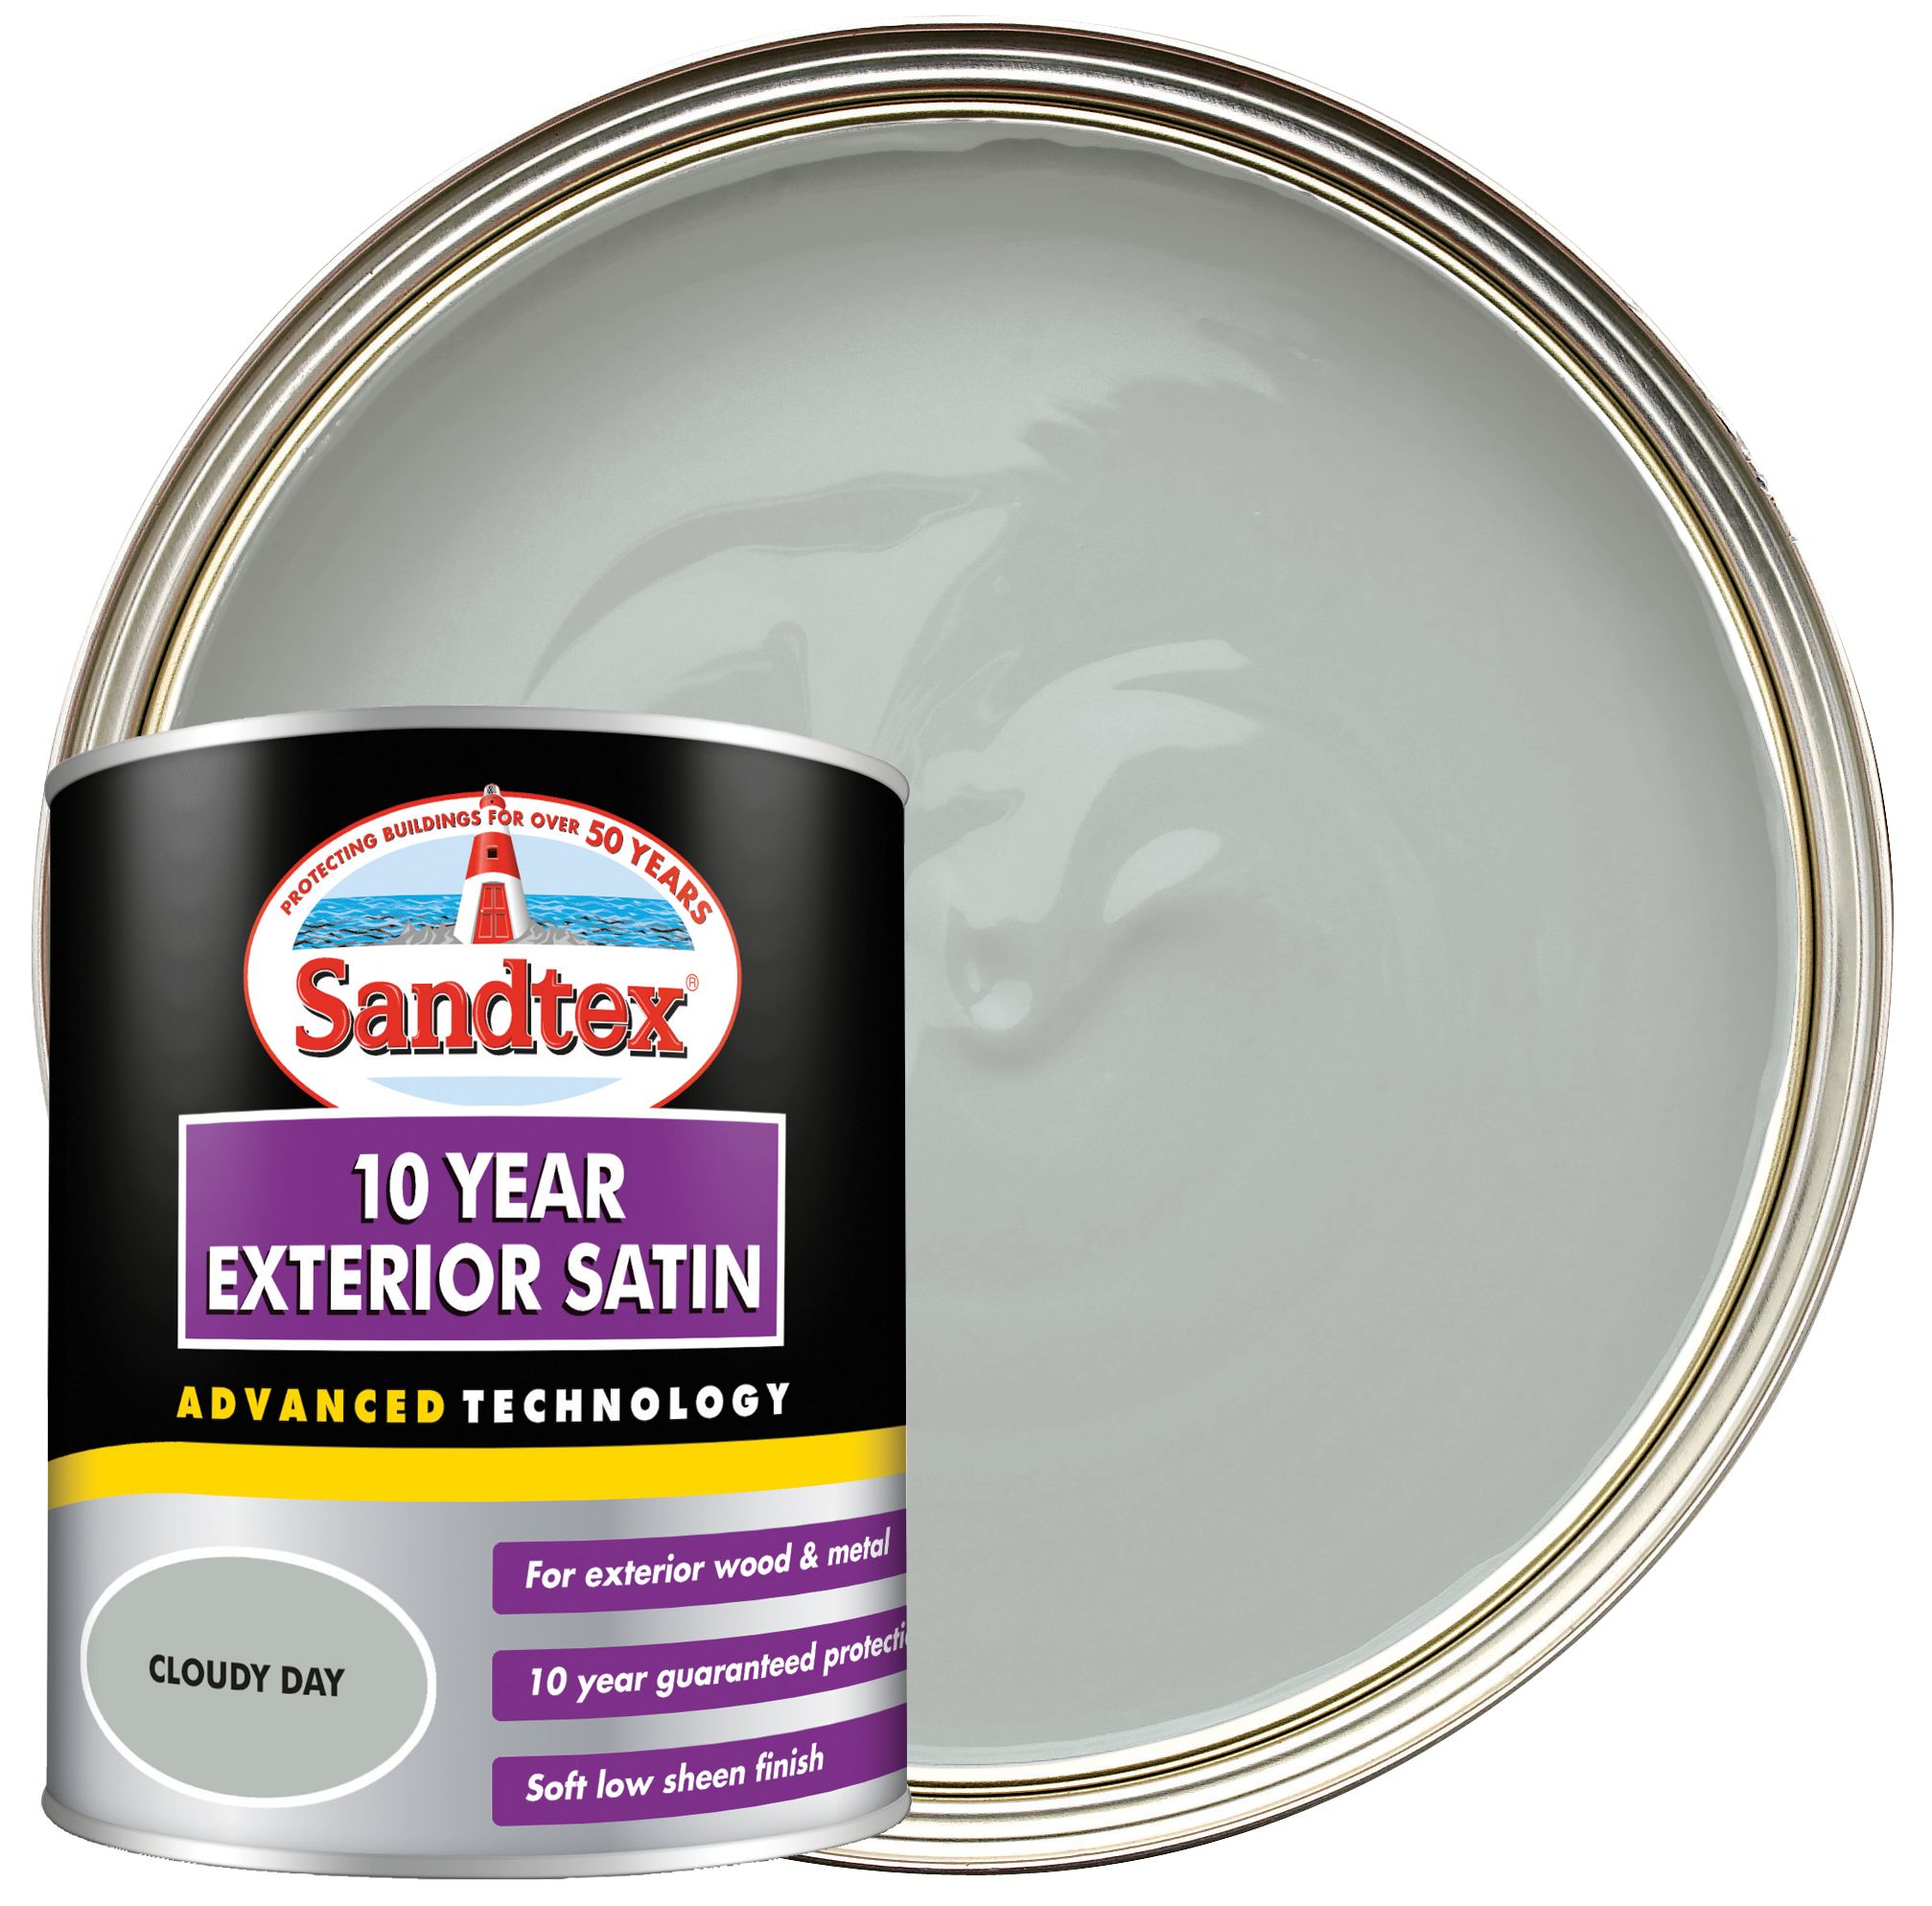 Image of Sandtex 10 Year Exterior Satin Paint - Cloudy Day - 750ml